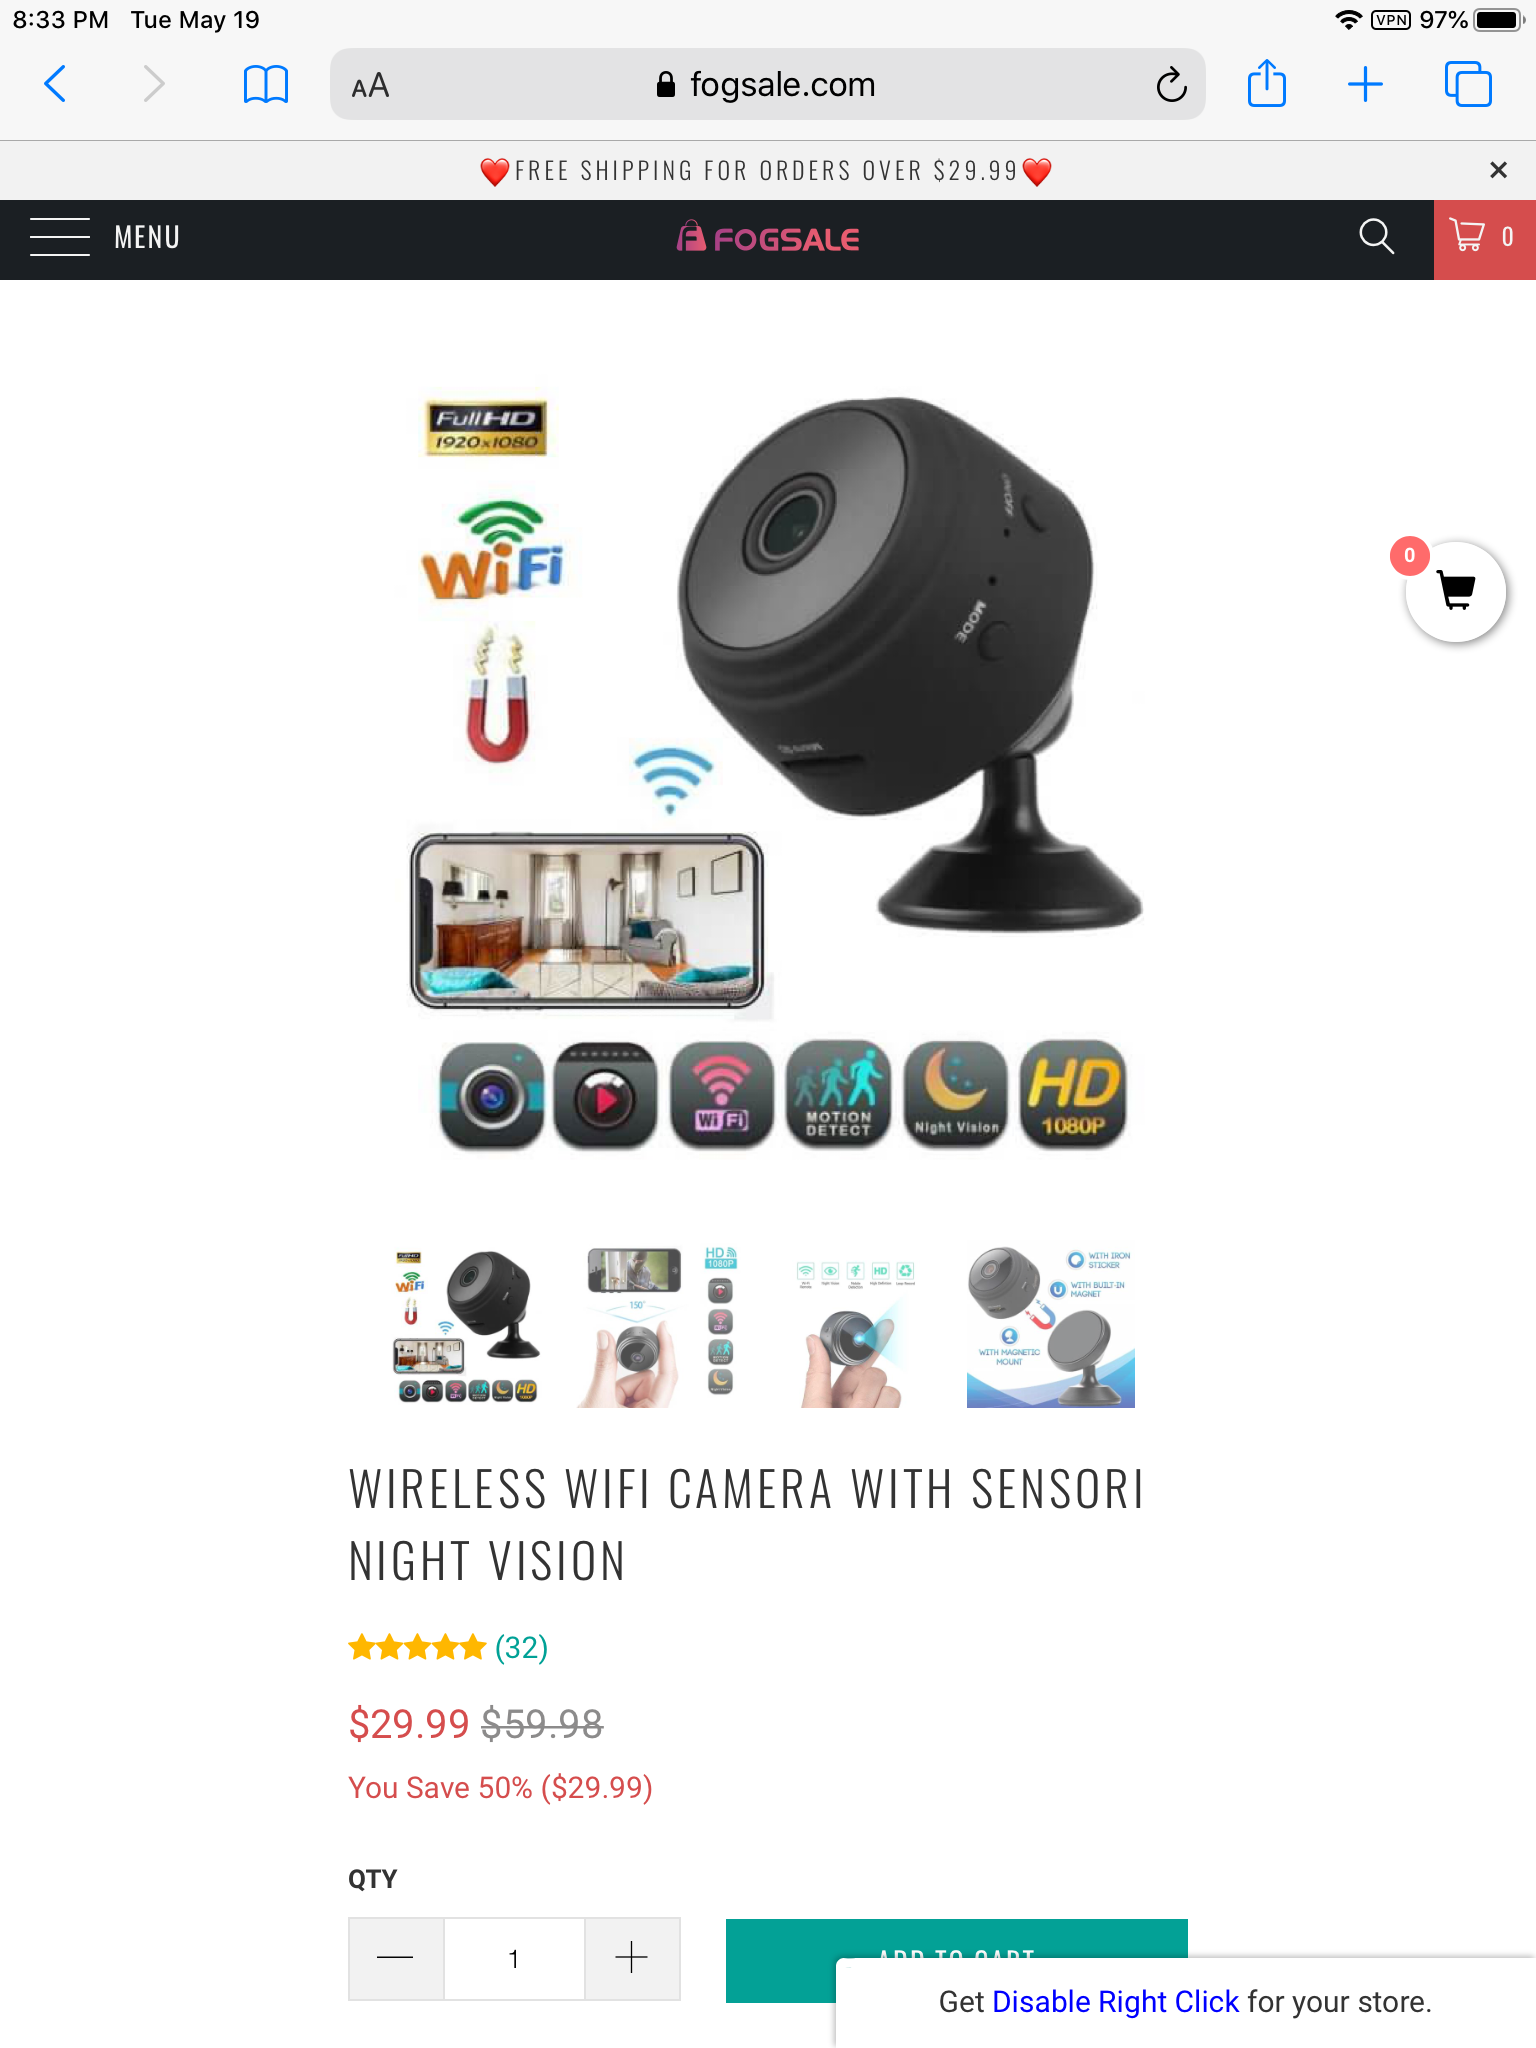 The camera I ordered from their website